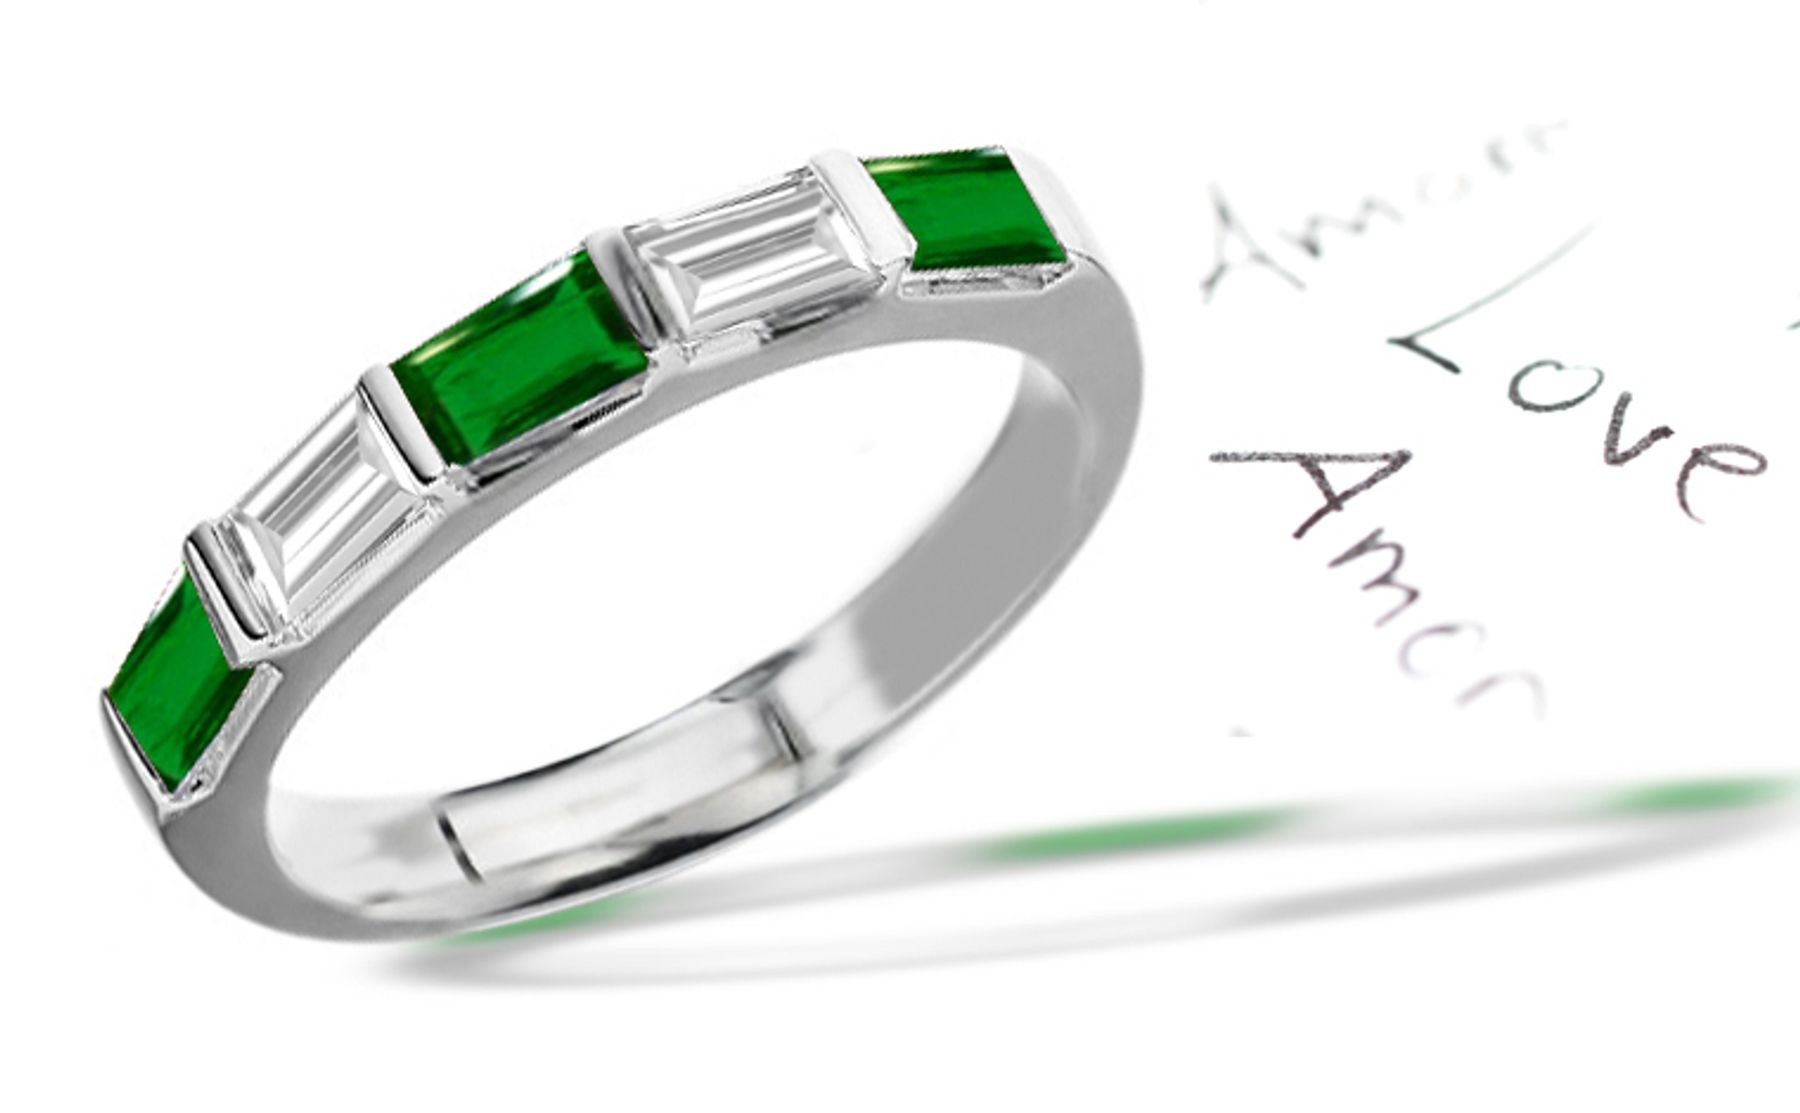 For That Special Someone: 5 Stone Baguette Emerald & Diamond Wedding Ring